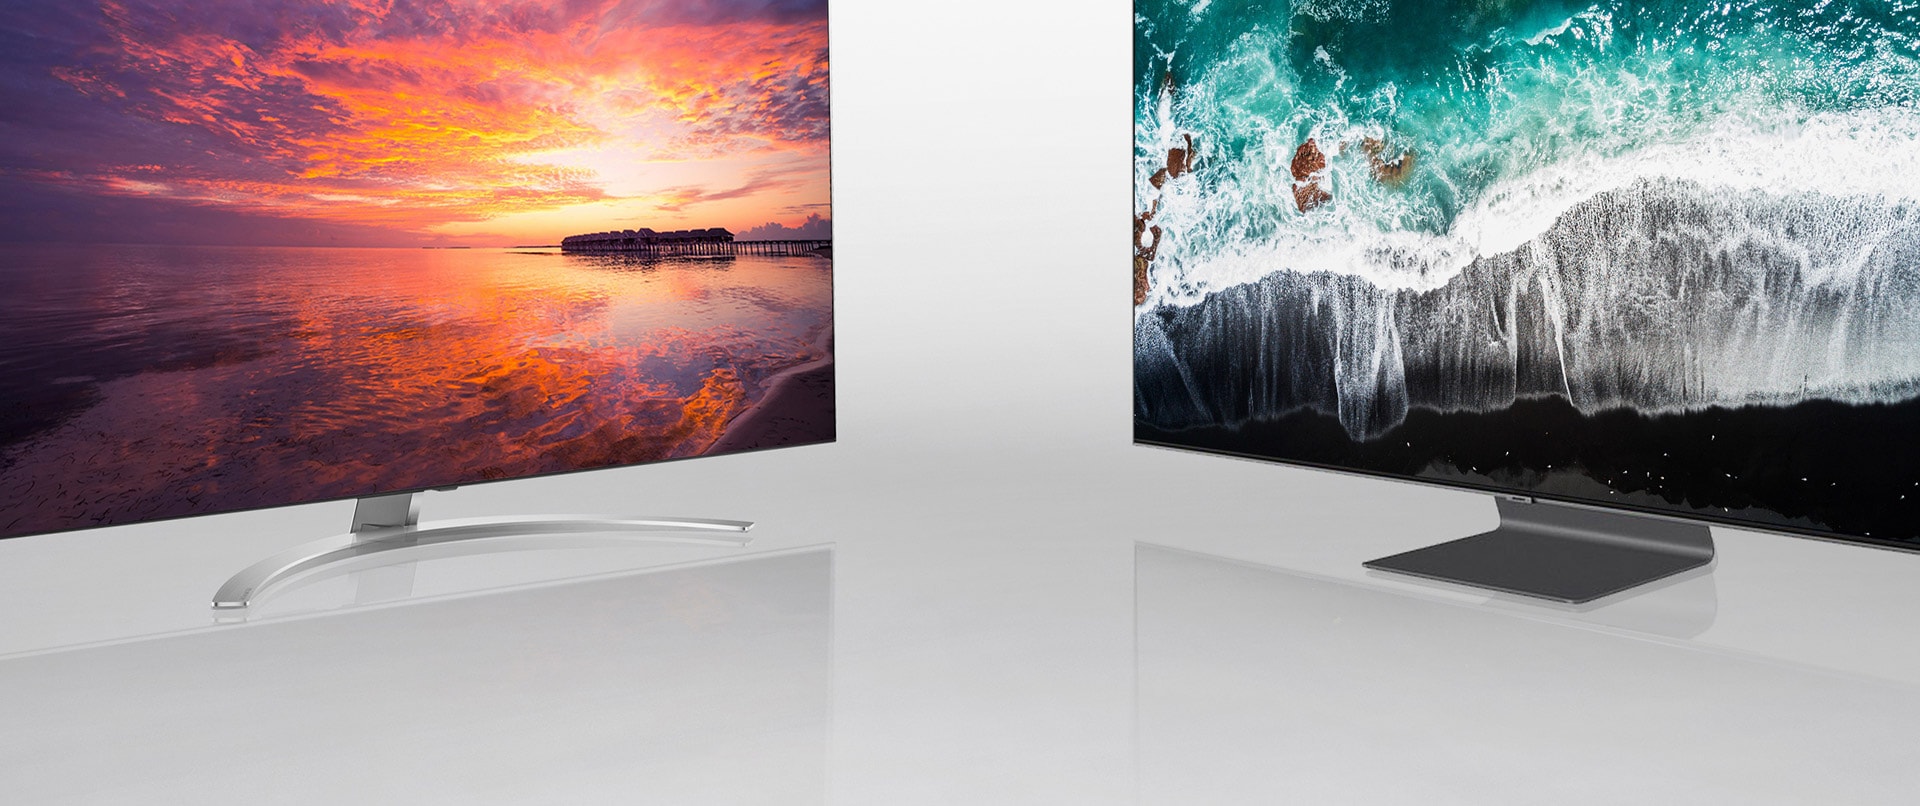 Competing for the Pinnacle of LED TV Evolution NanoCell TV vs QLED TV